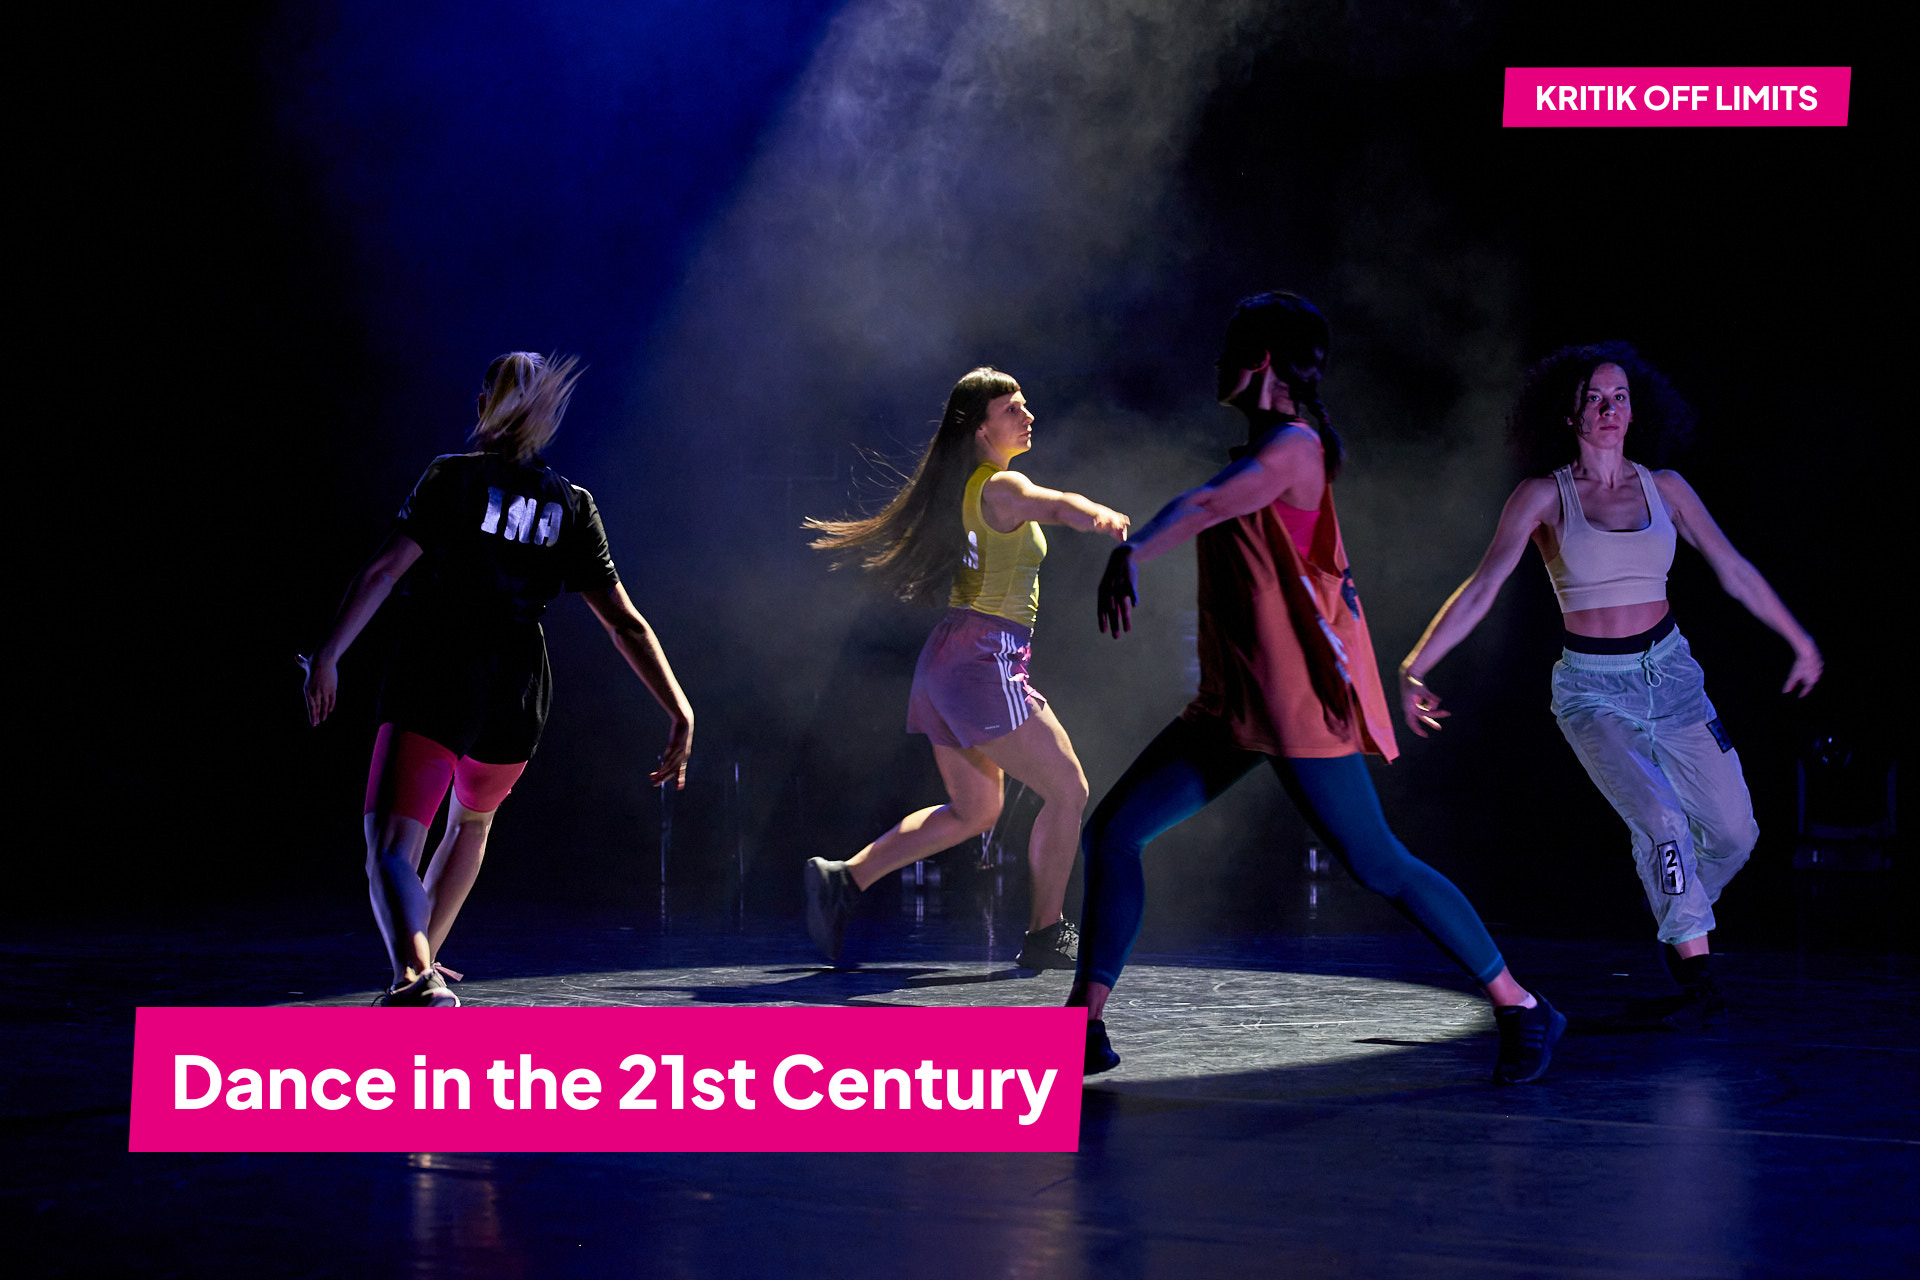 Kritik OFF LIMITS – Dance in the 21st Century